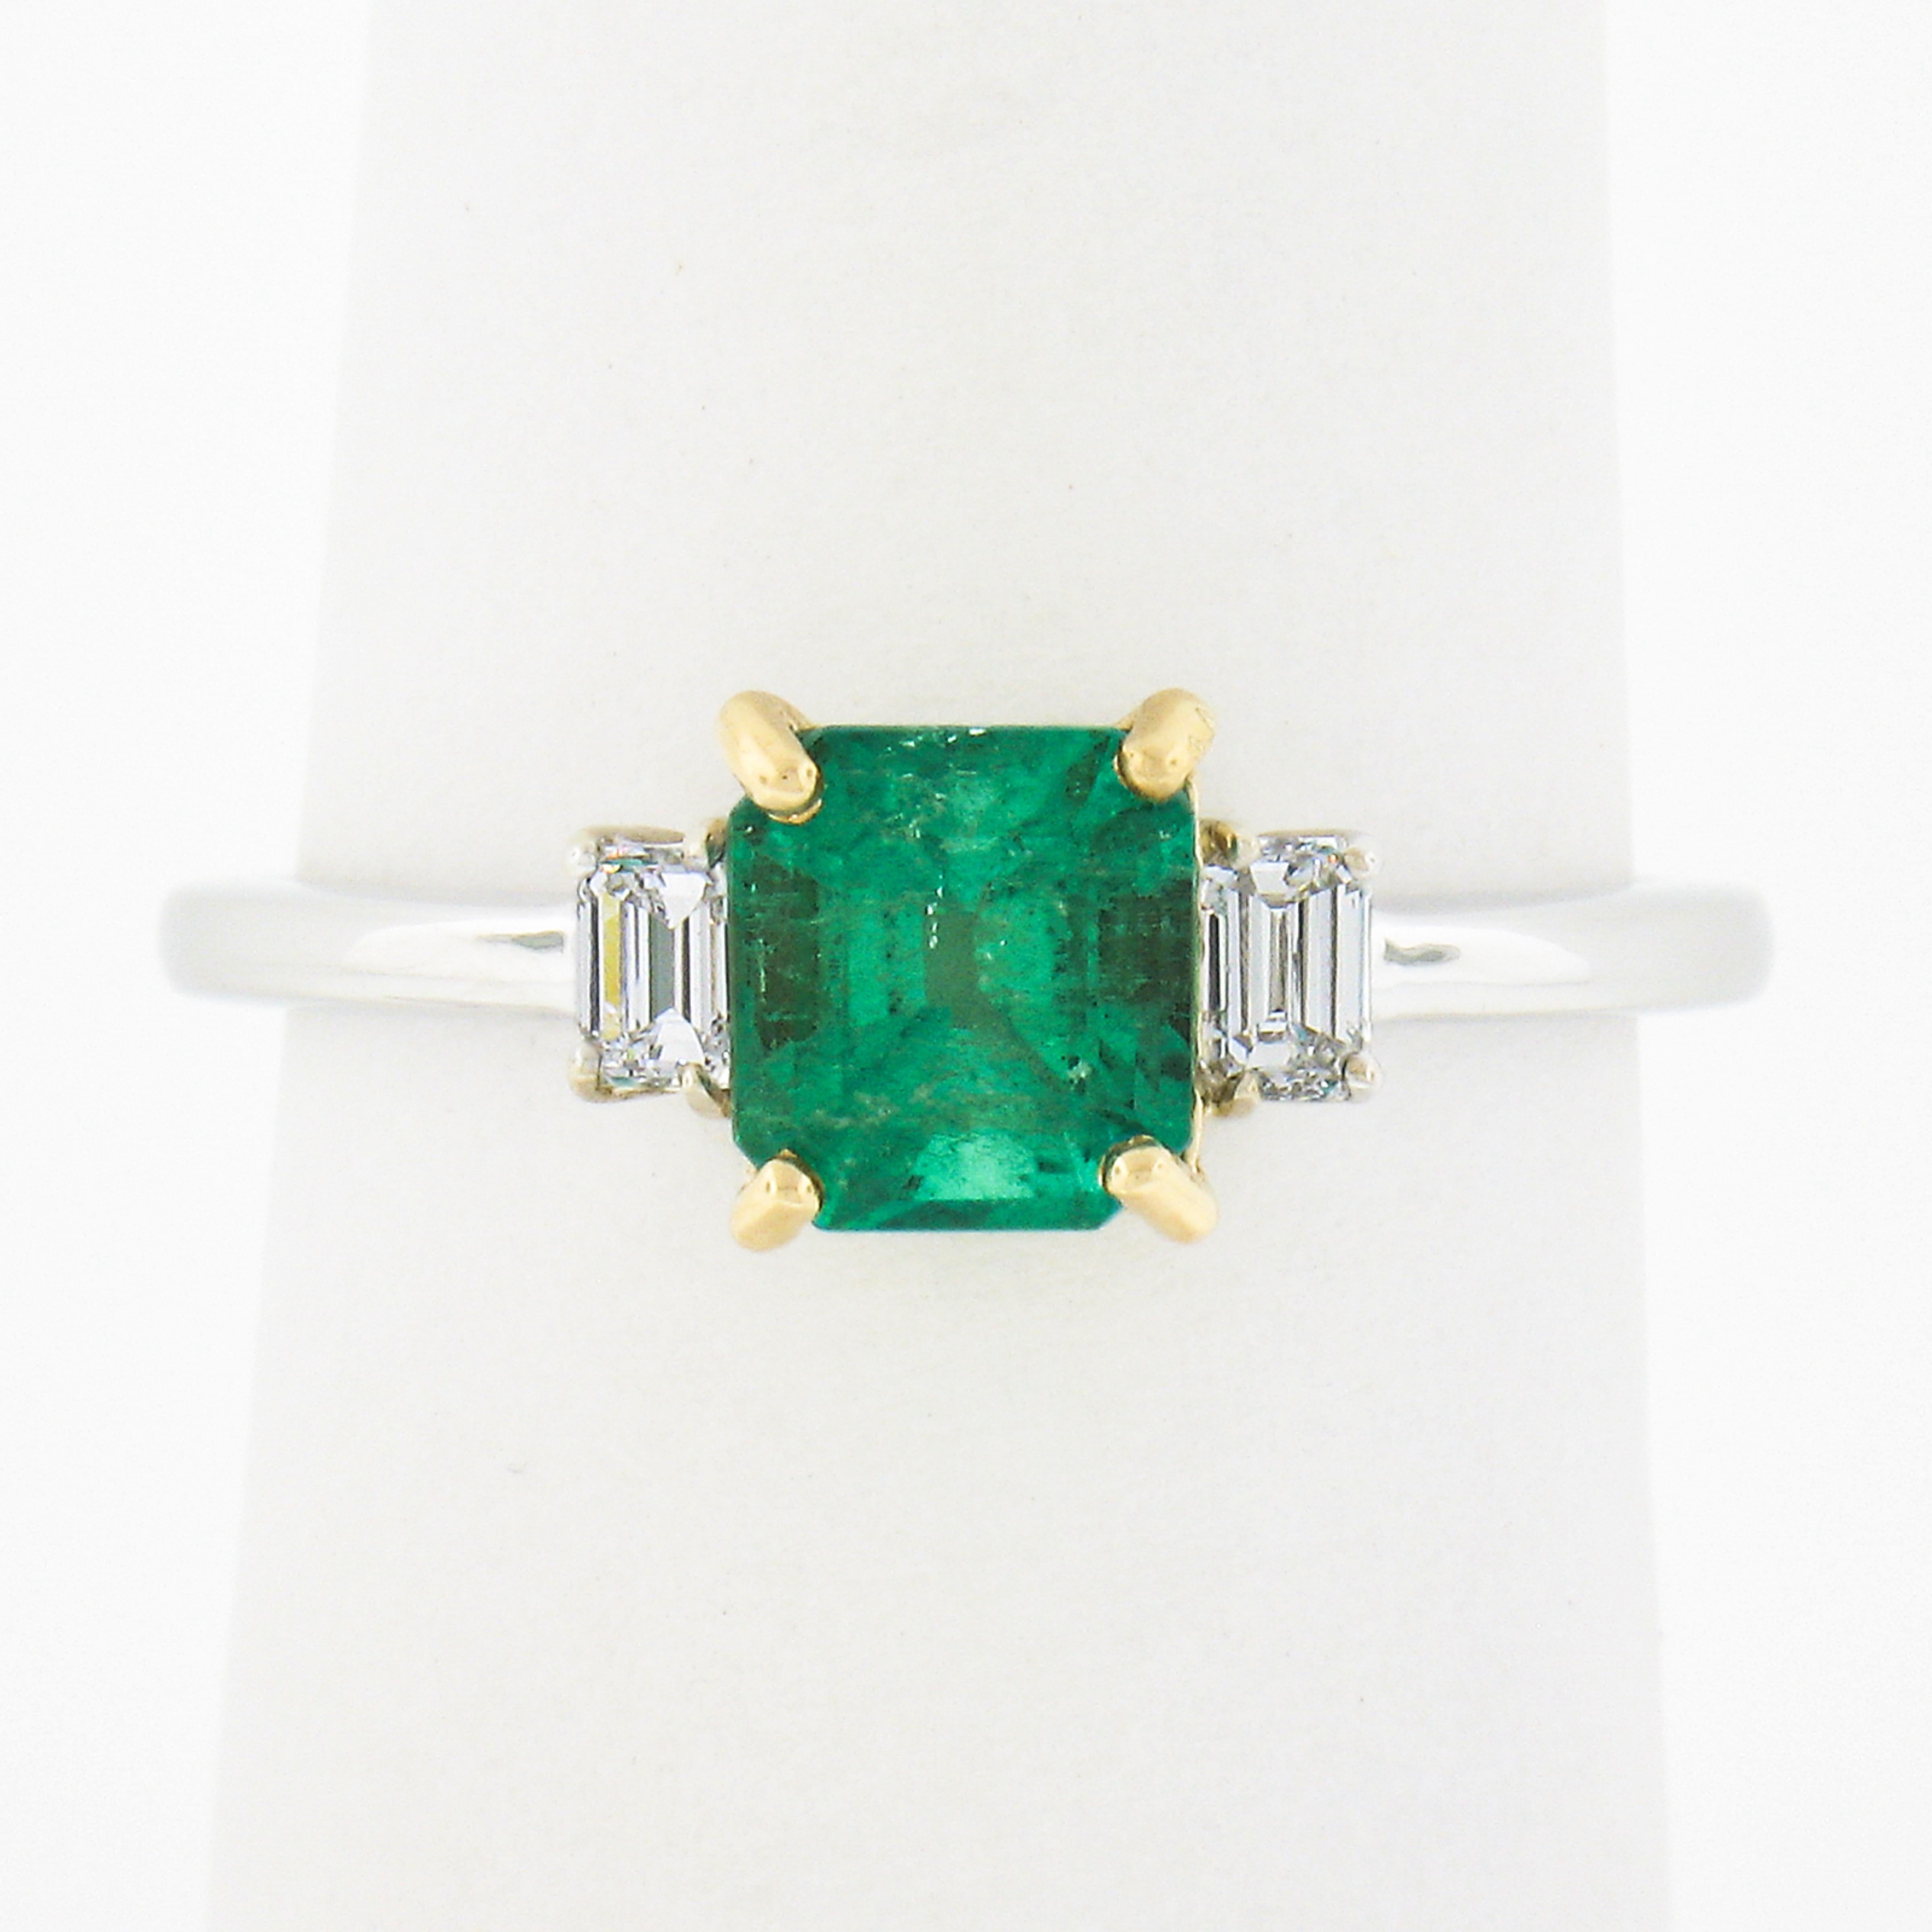 Here we have a magnificent emerald and diamond ring that is newly crafted in solid 18k white gold with a yellow gold center that features a gorgeous natural Colombian emerald stone. The solitaire displays a vibrant and truly incredible happy green